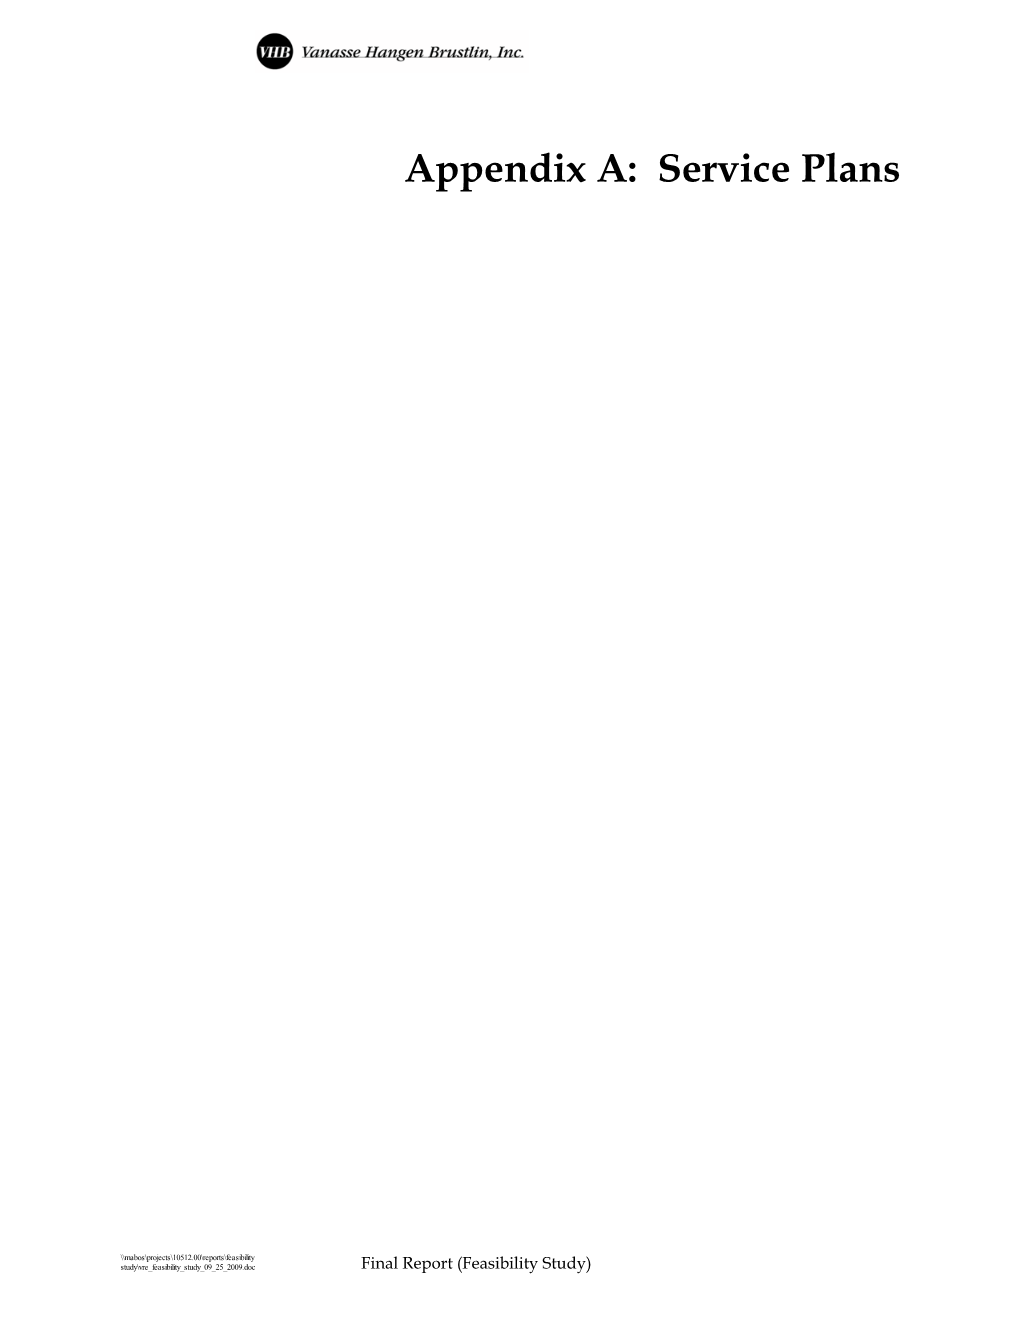 Feasibility Study Report Appendices